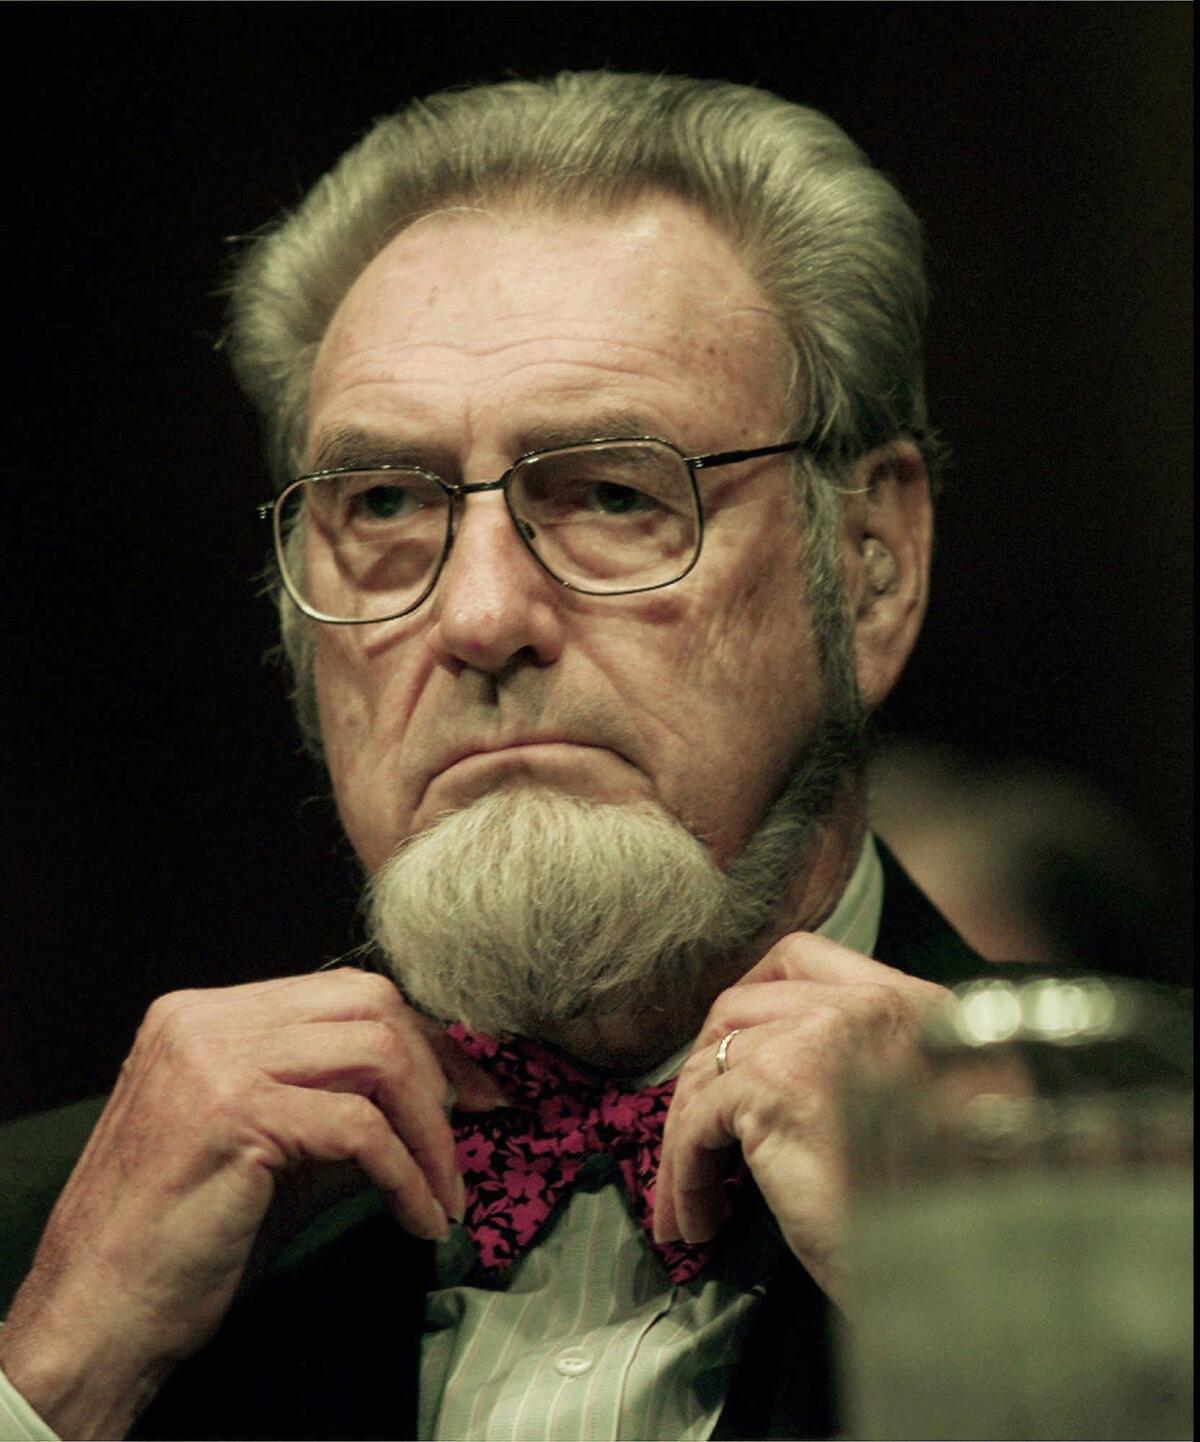 Former Surgeon General C. Everett Koop adjusts his bow tie before the start of the Committee on Agriculture hearing Sept. 11, 1997, at the Capitol. Koop attended the hearing to examine the implications of the proposed tobacco settlement.